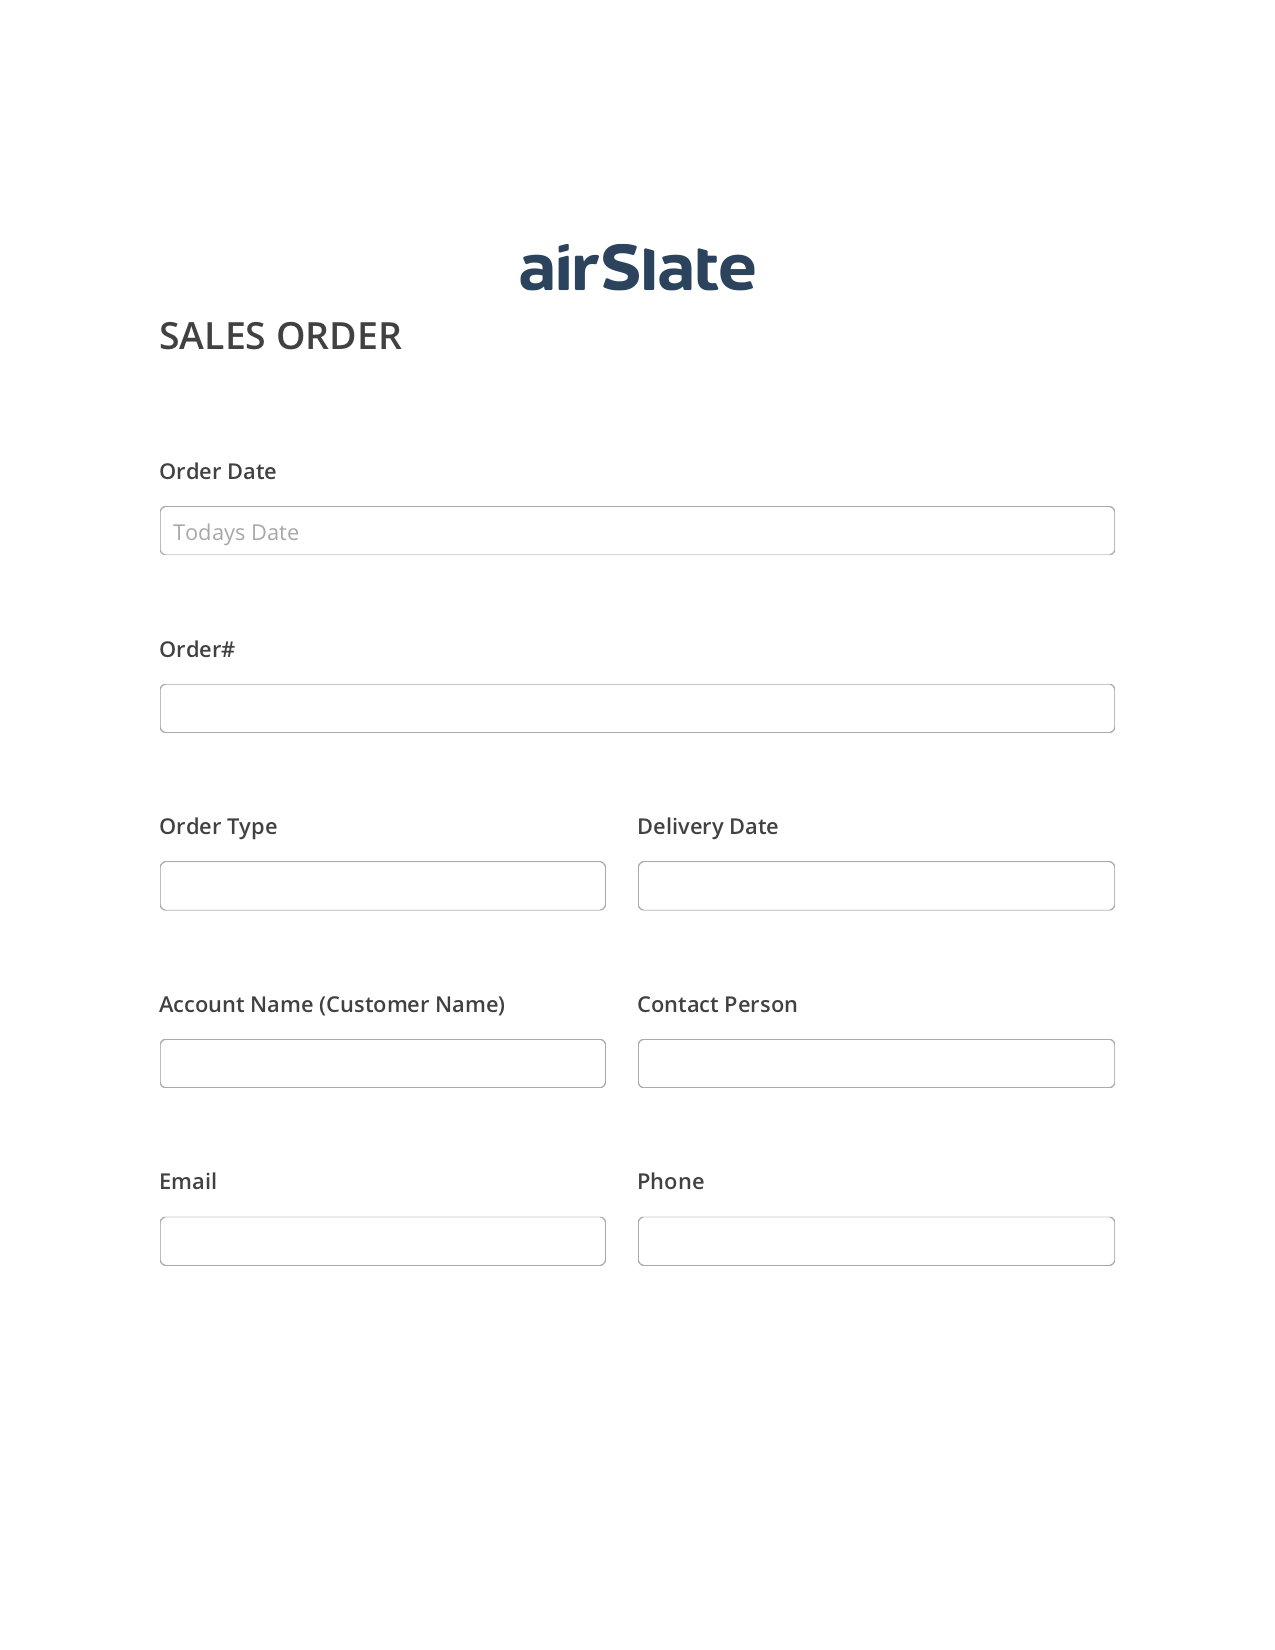 Sales Order Workflow Prefill from NetSuite records, Send a Slate to Salesforce Contact Bot, Post-finish Document Bot